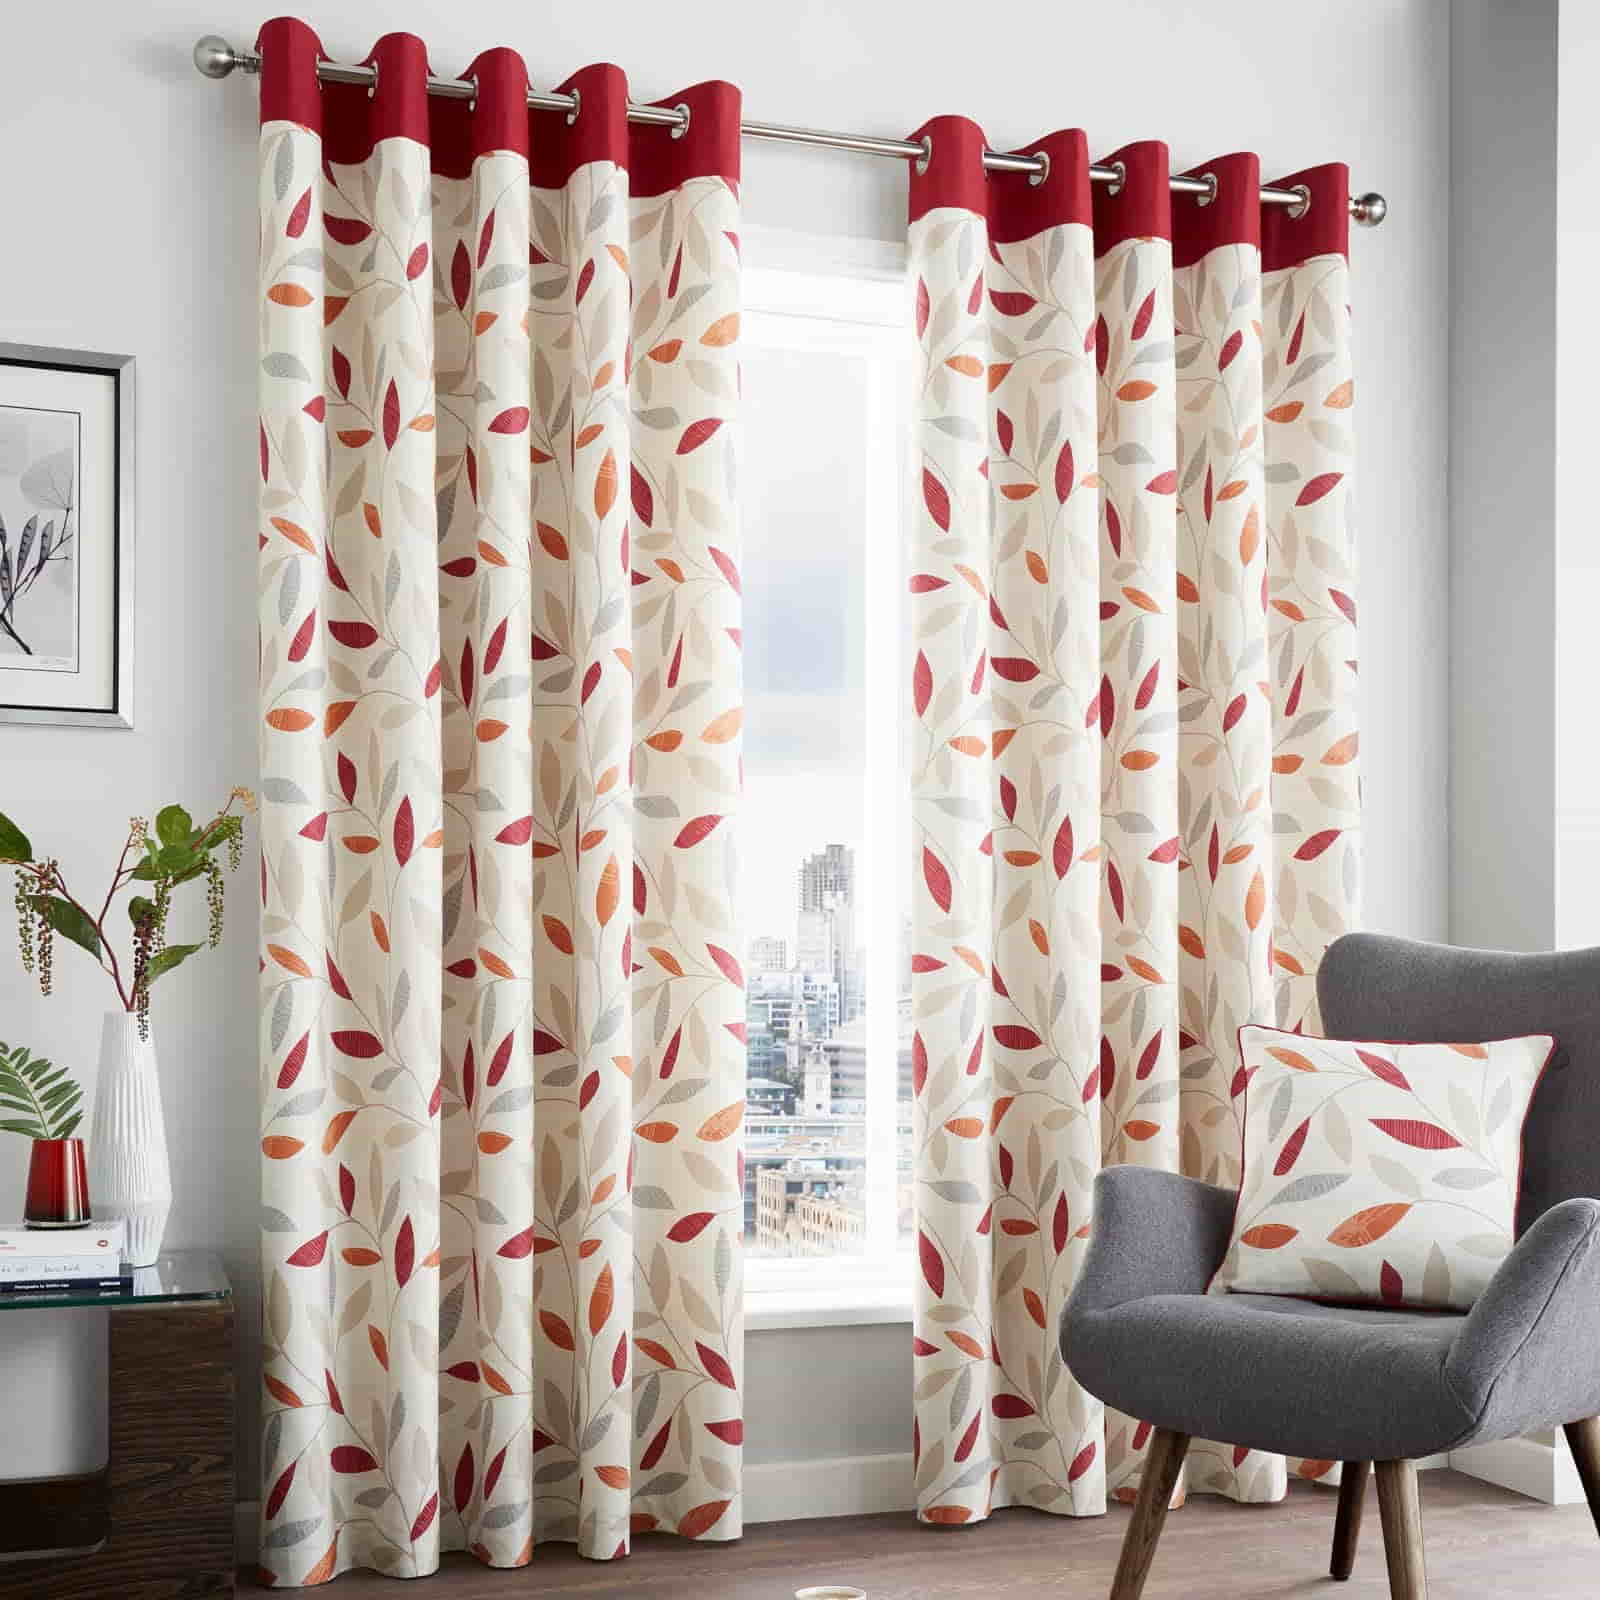 Budget-Friendly Curtain Ideas to Spruce Up Your Living Space